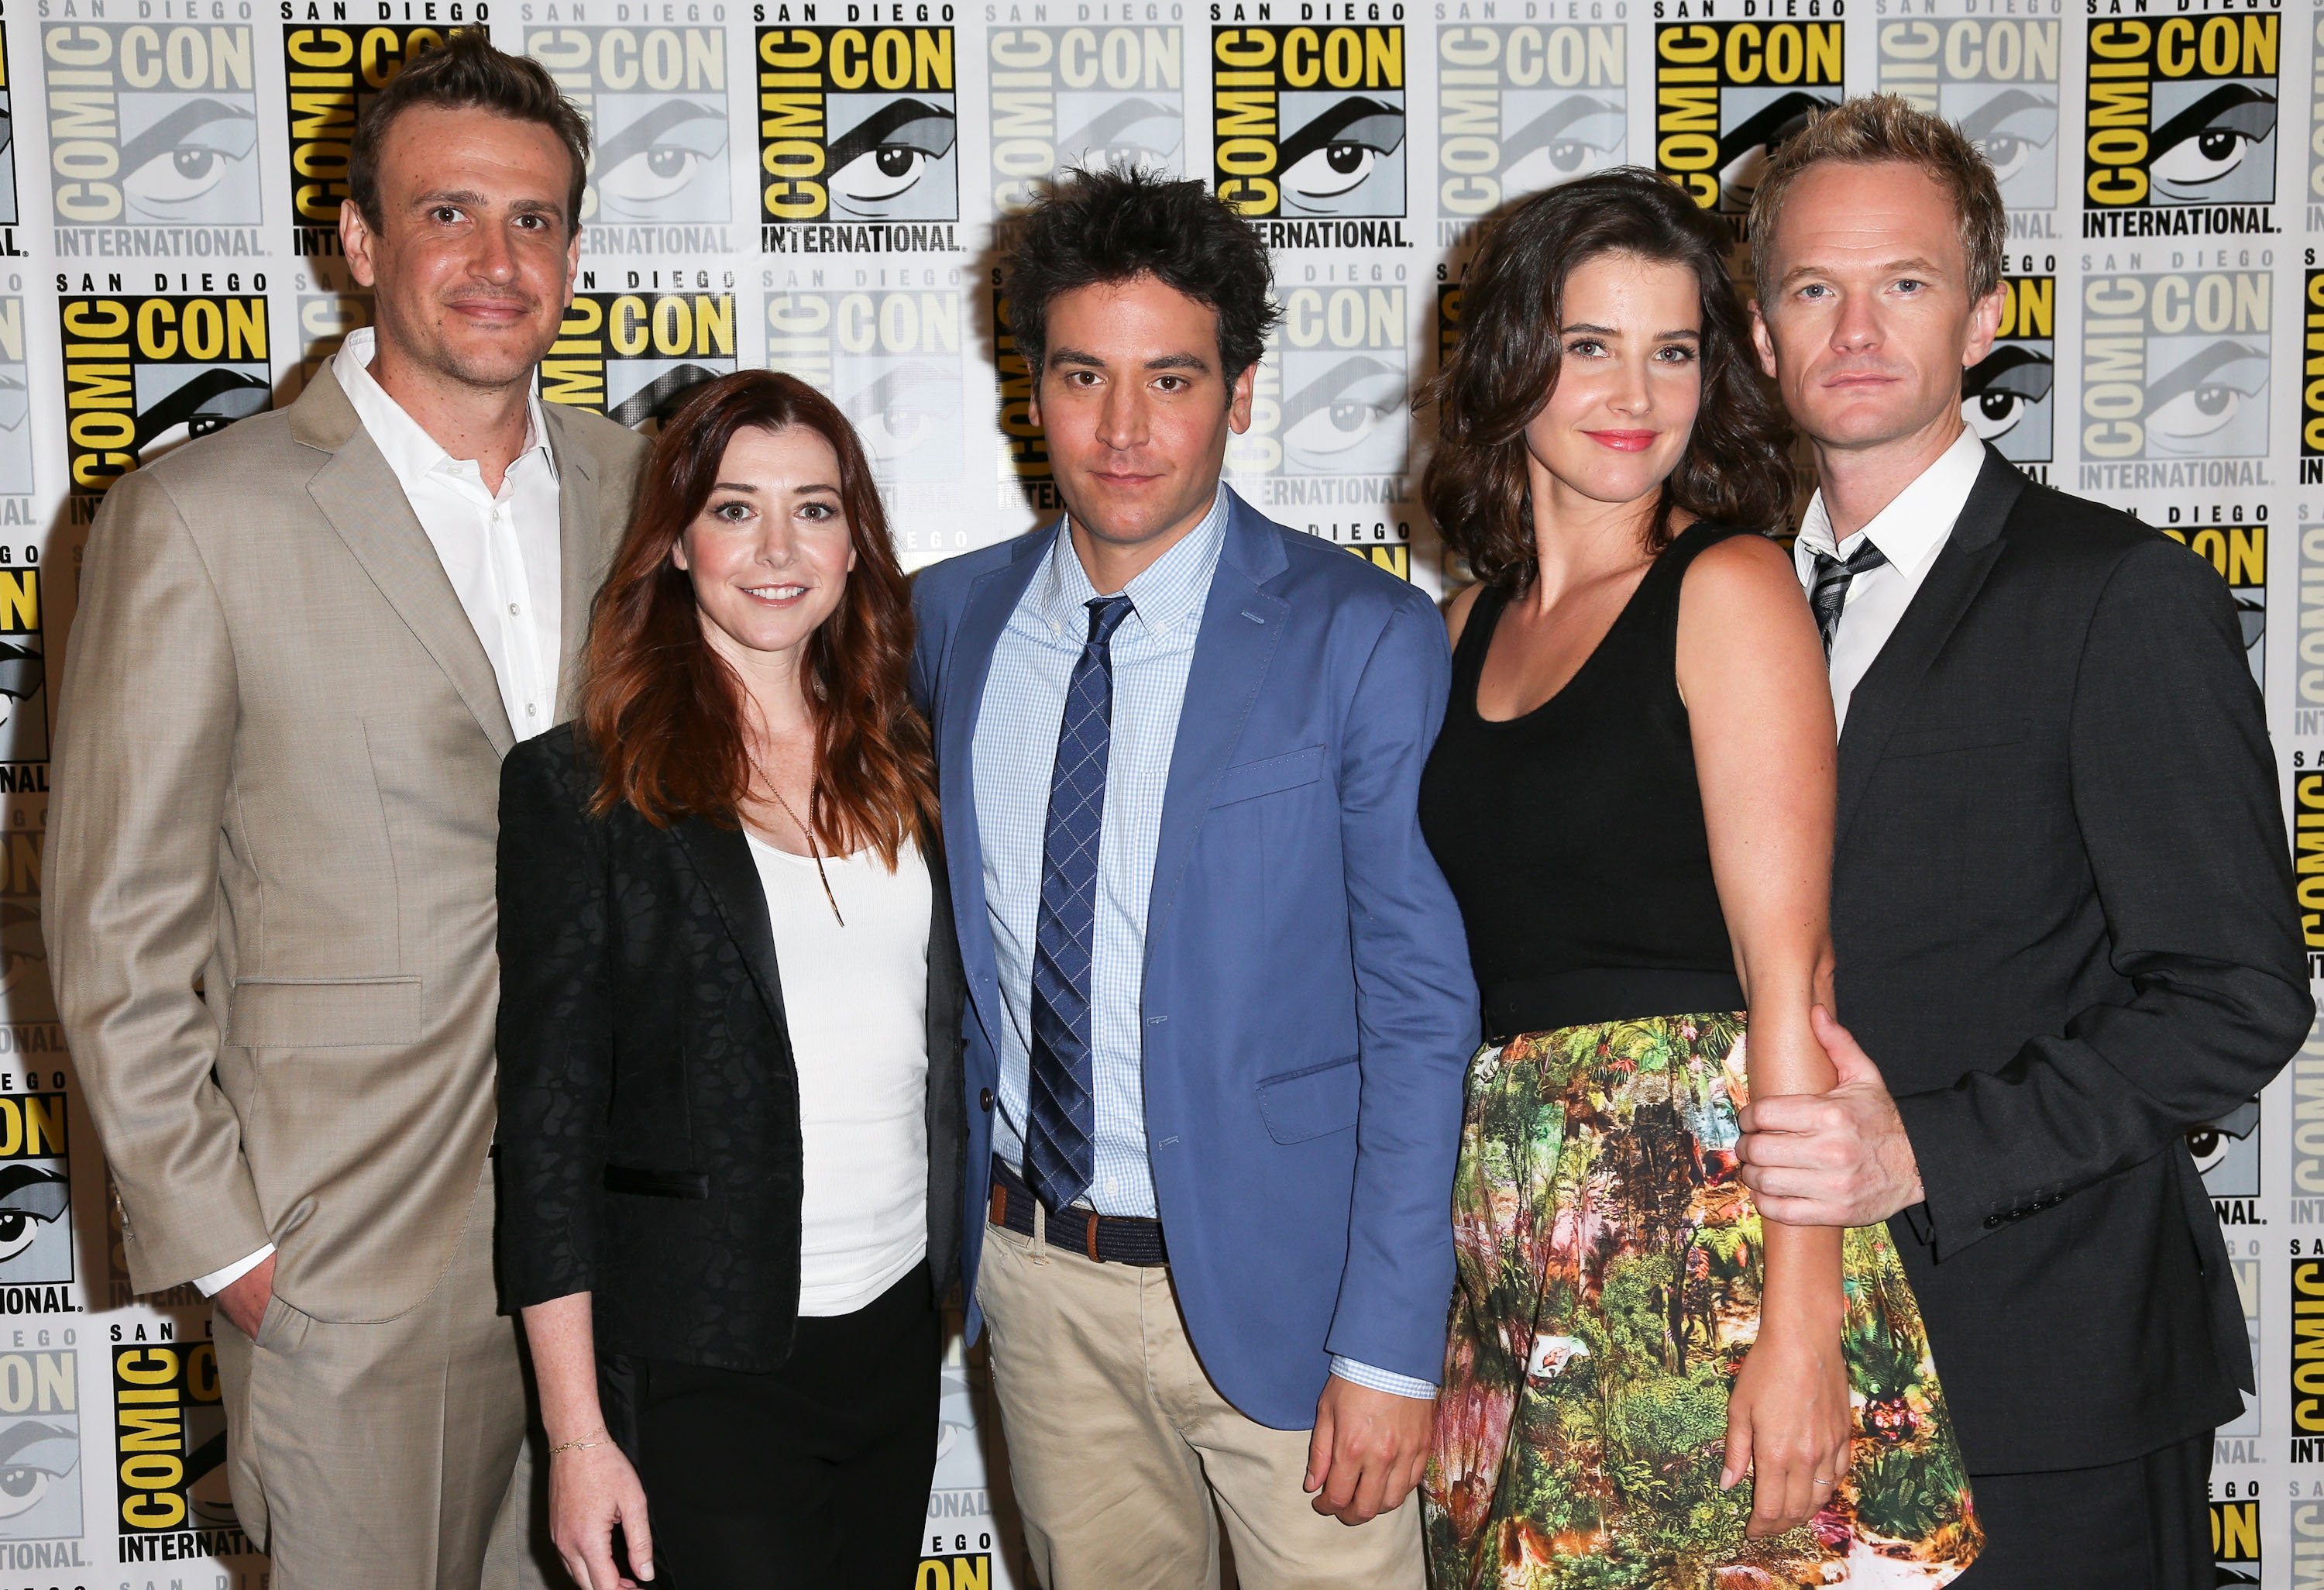 The cast of 'How I Met Your Mother,' Jason Segel, Alyson Hannigan, Josh Radnor, Cobie Smulders, and Neil Patrick Harris, who might appear in 'How I Met Your Father' Season 2, pose for photos. Segel wears a tan suit over a white button-up shirt and tan pants. Hannigan wears a black jacket over a white shirt and black pants. Radnor wears a blue suit over a light blue button-up shirt, blue tie, and tan pants. Smulders wears a black tank top and skirt with a forest scene on it. Harris wears a black suit over a white button-up shirt and black and gray tie.